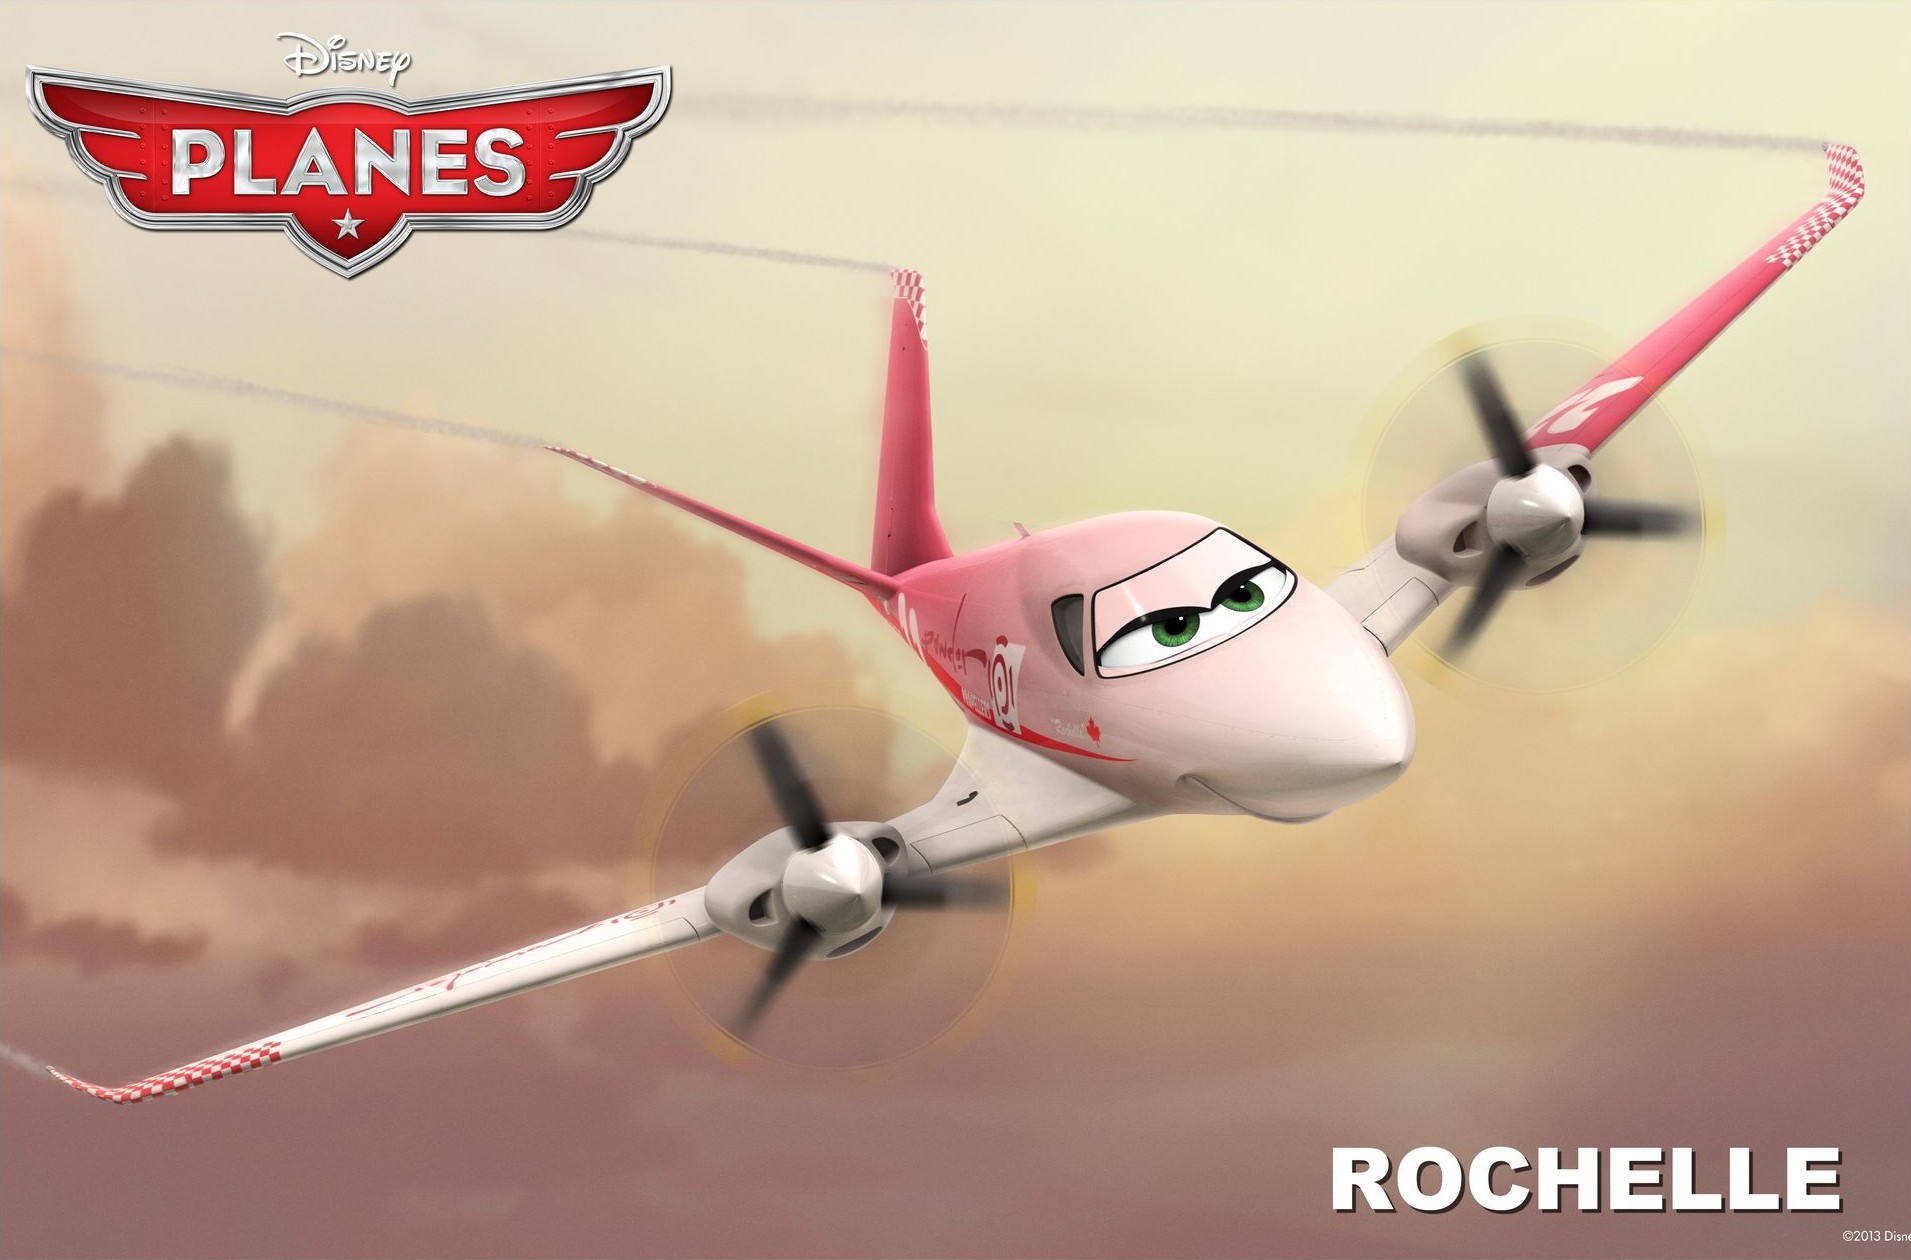 Rochelle from Walt Disney Pictures' Planes (2013)